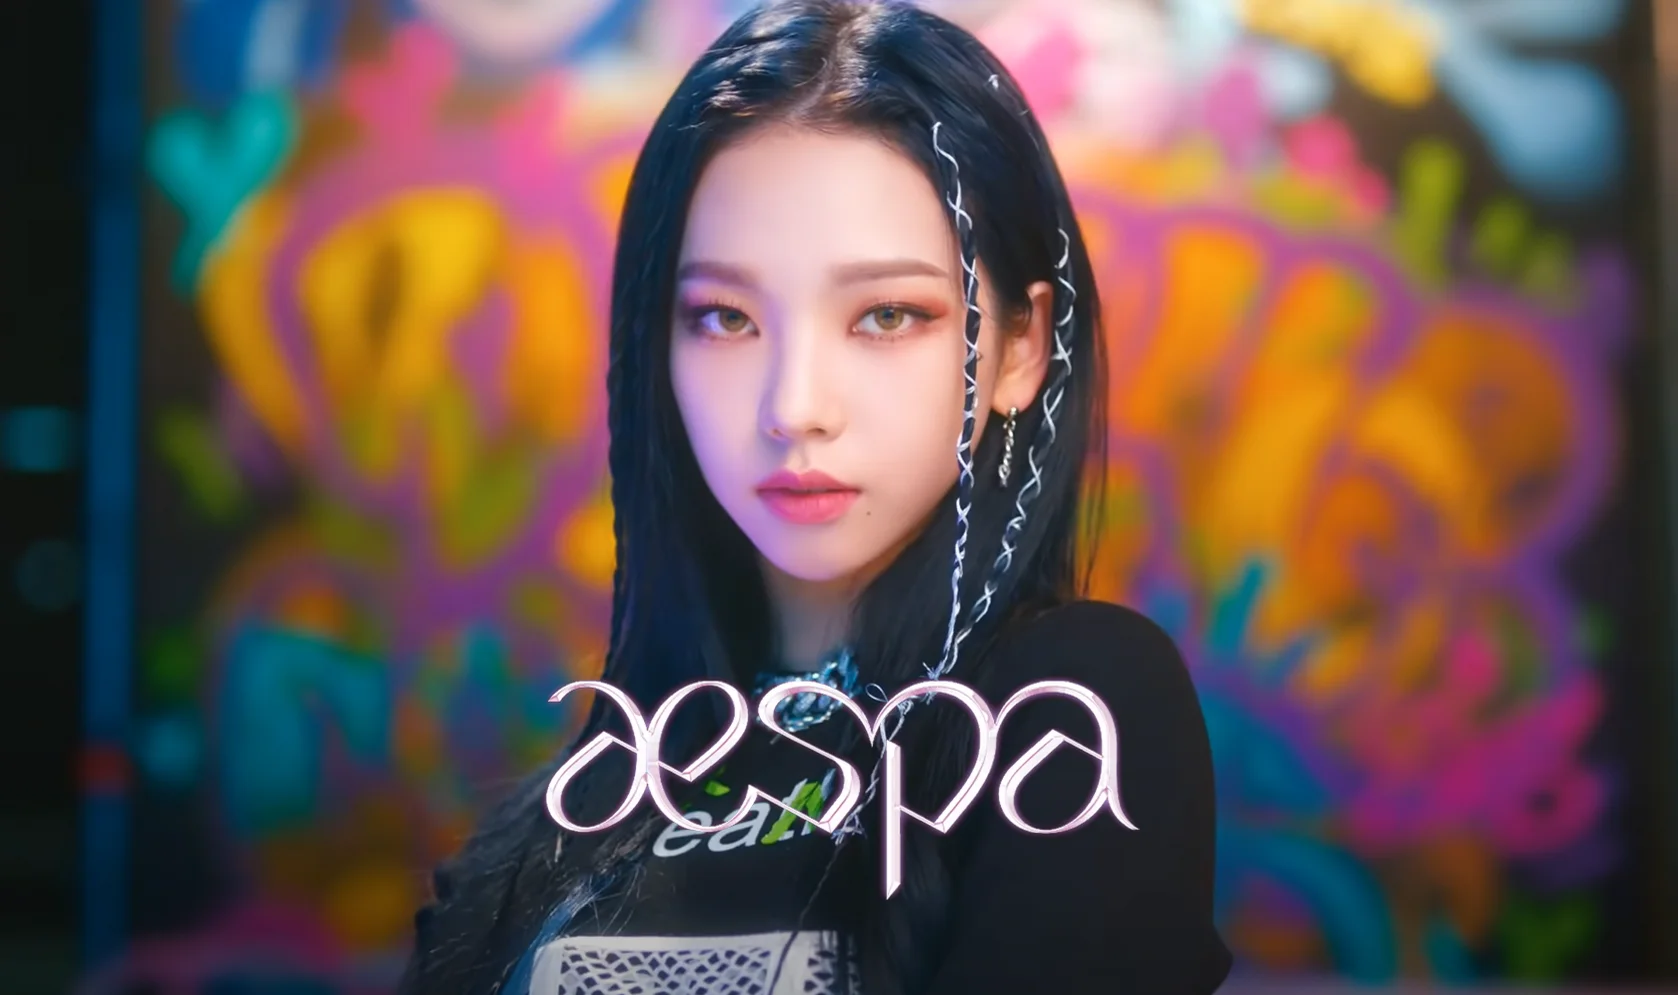 A blackpink member with long black hair, she is wearing a black top with the word JISPA written in white in front of her. - Aespa